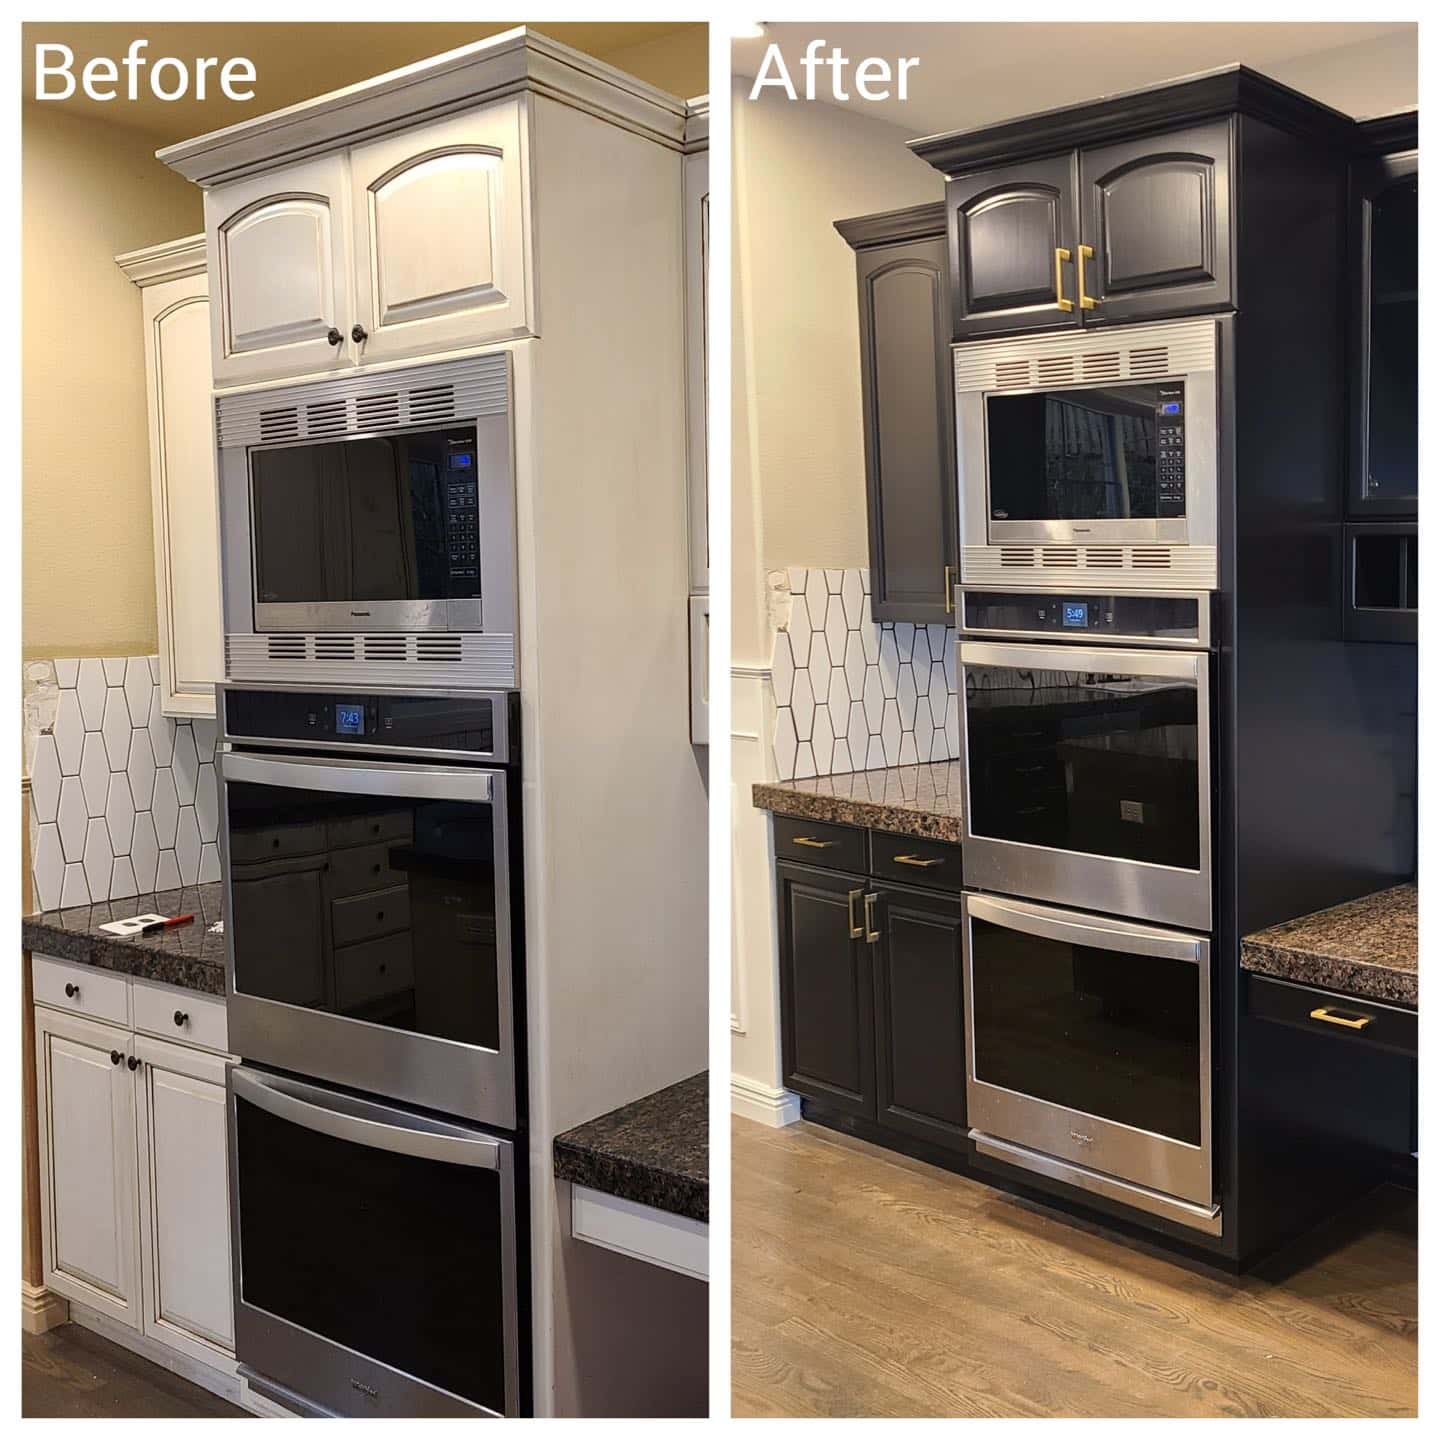 Before and after pictures of a kitchen with a modern makeover.